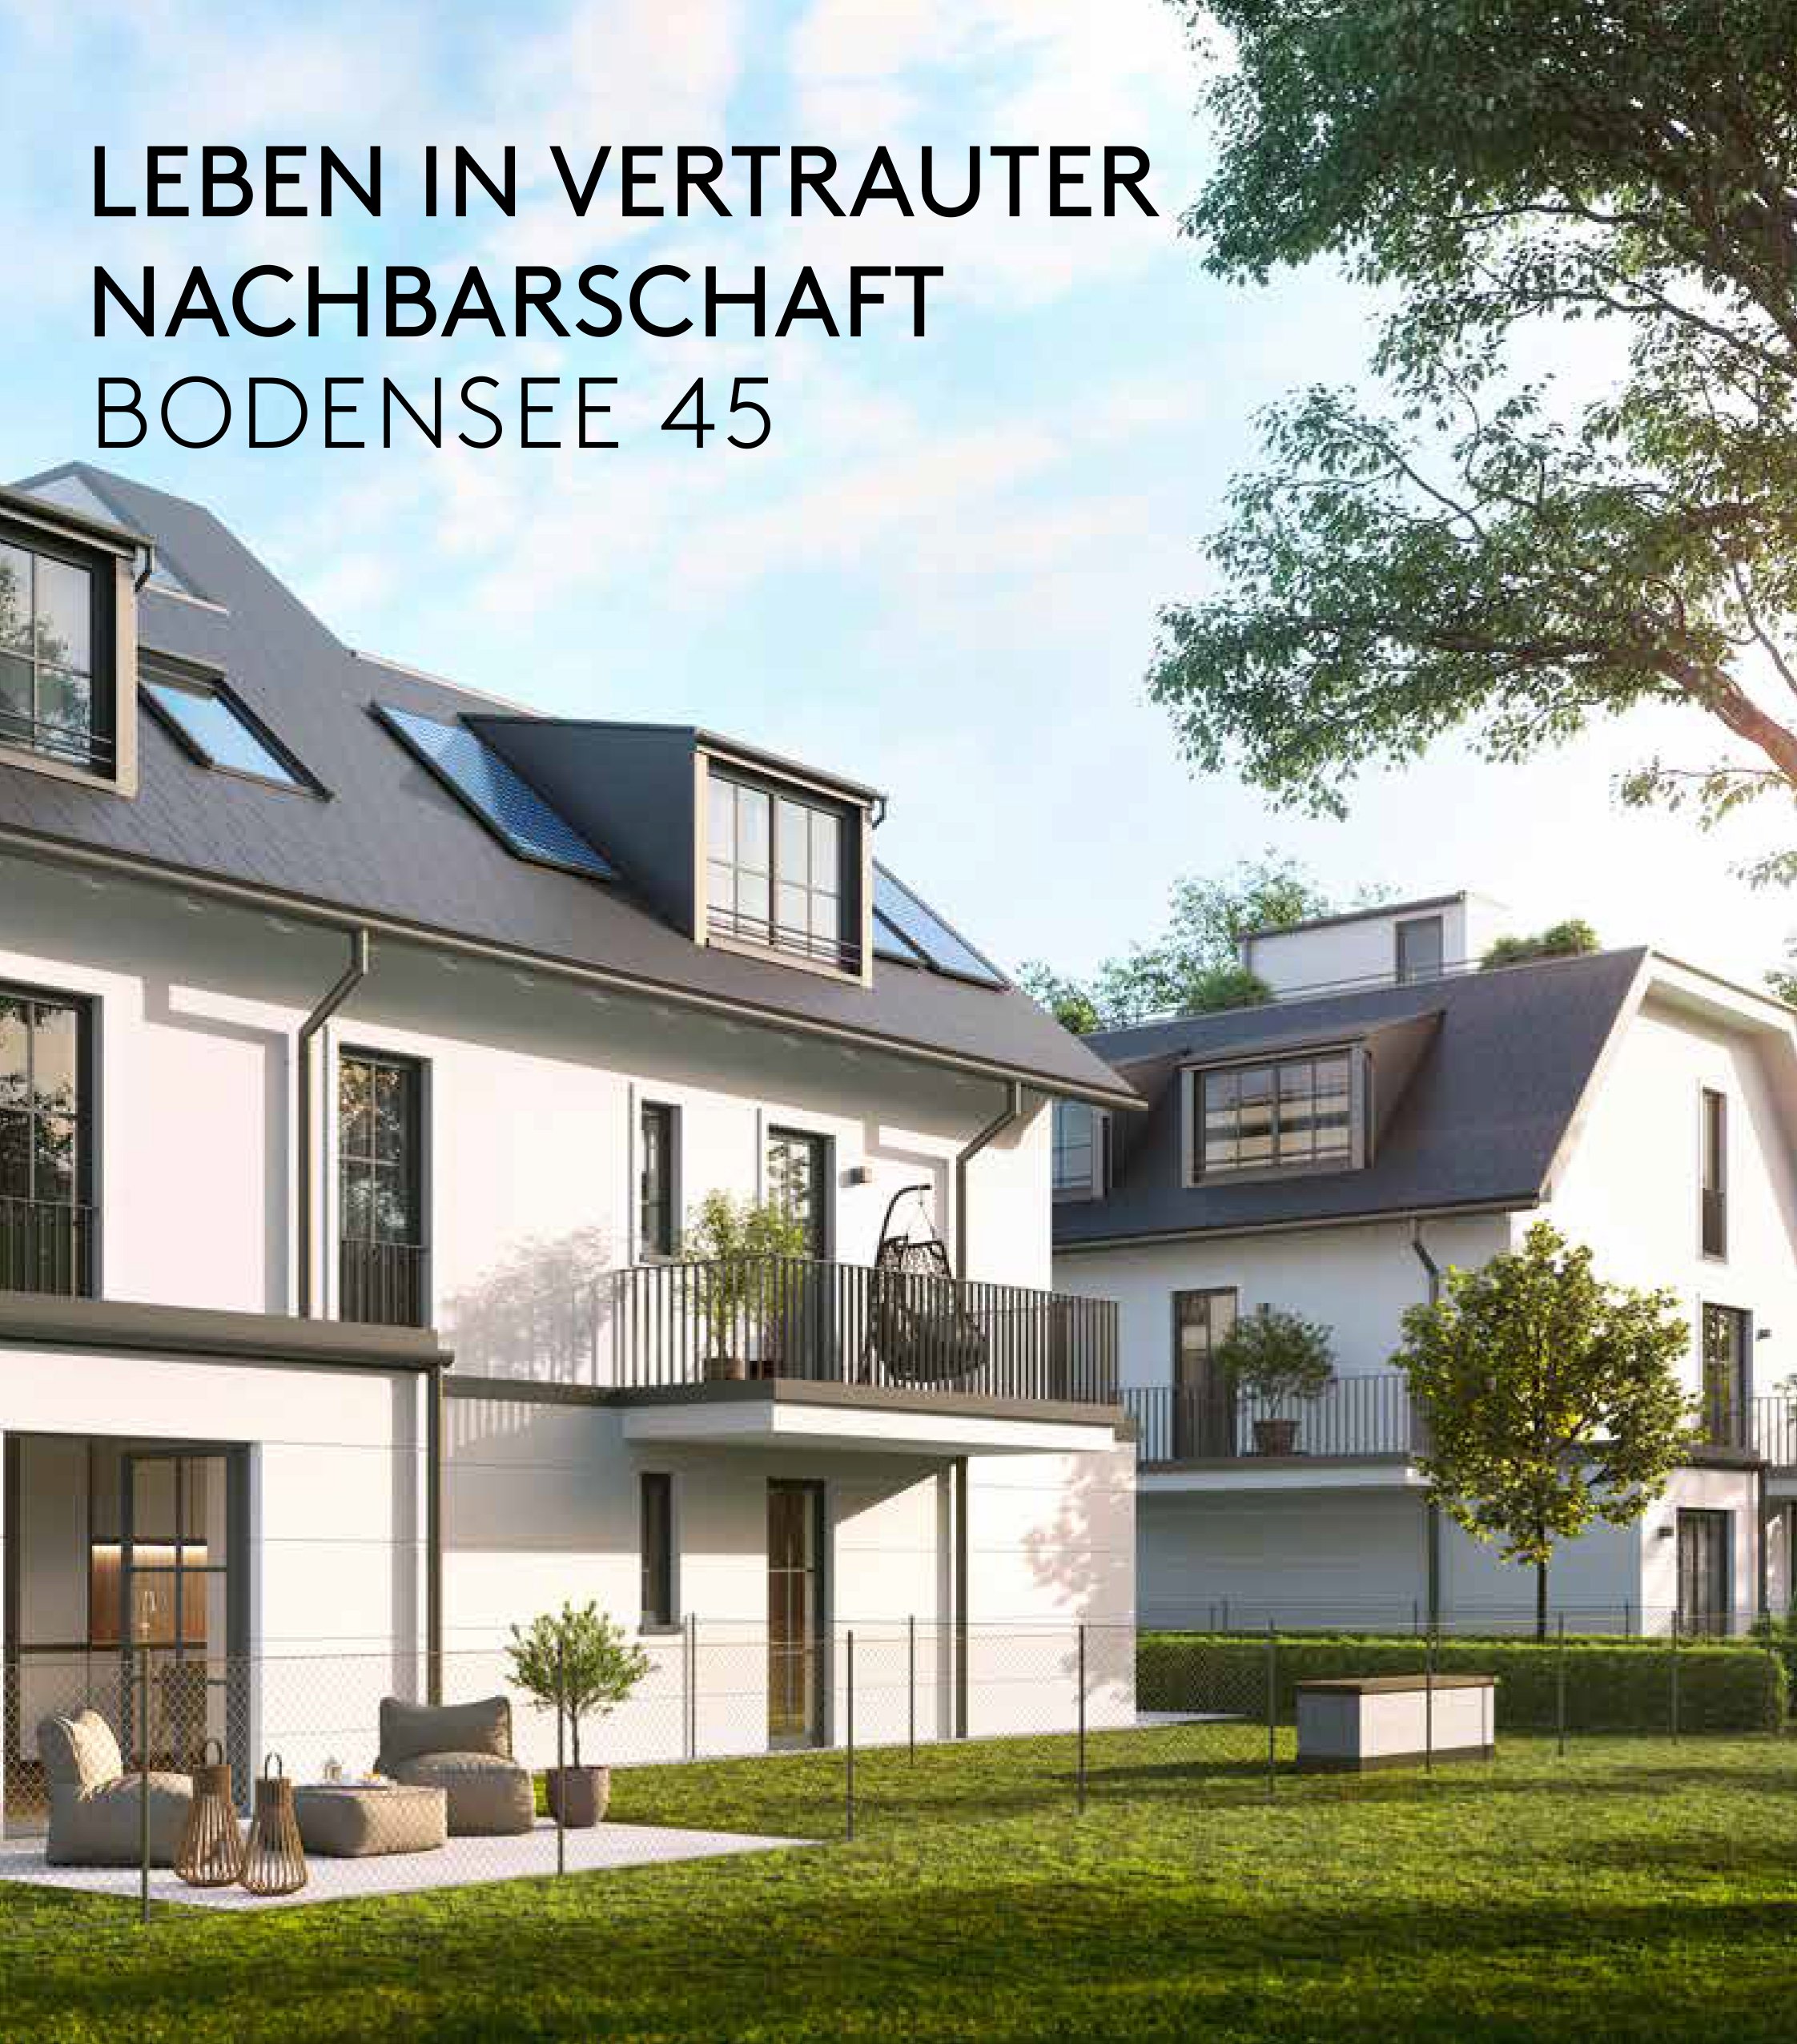 Image new build property BODENSEE 45 Munich